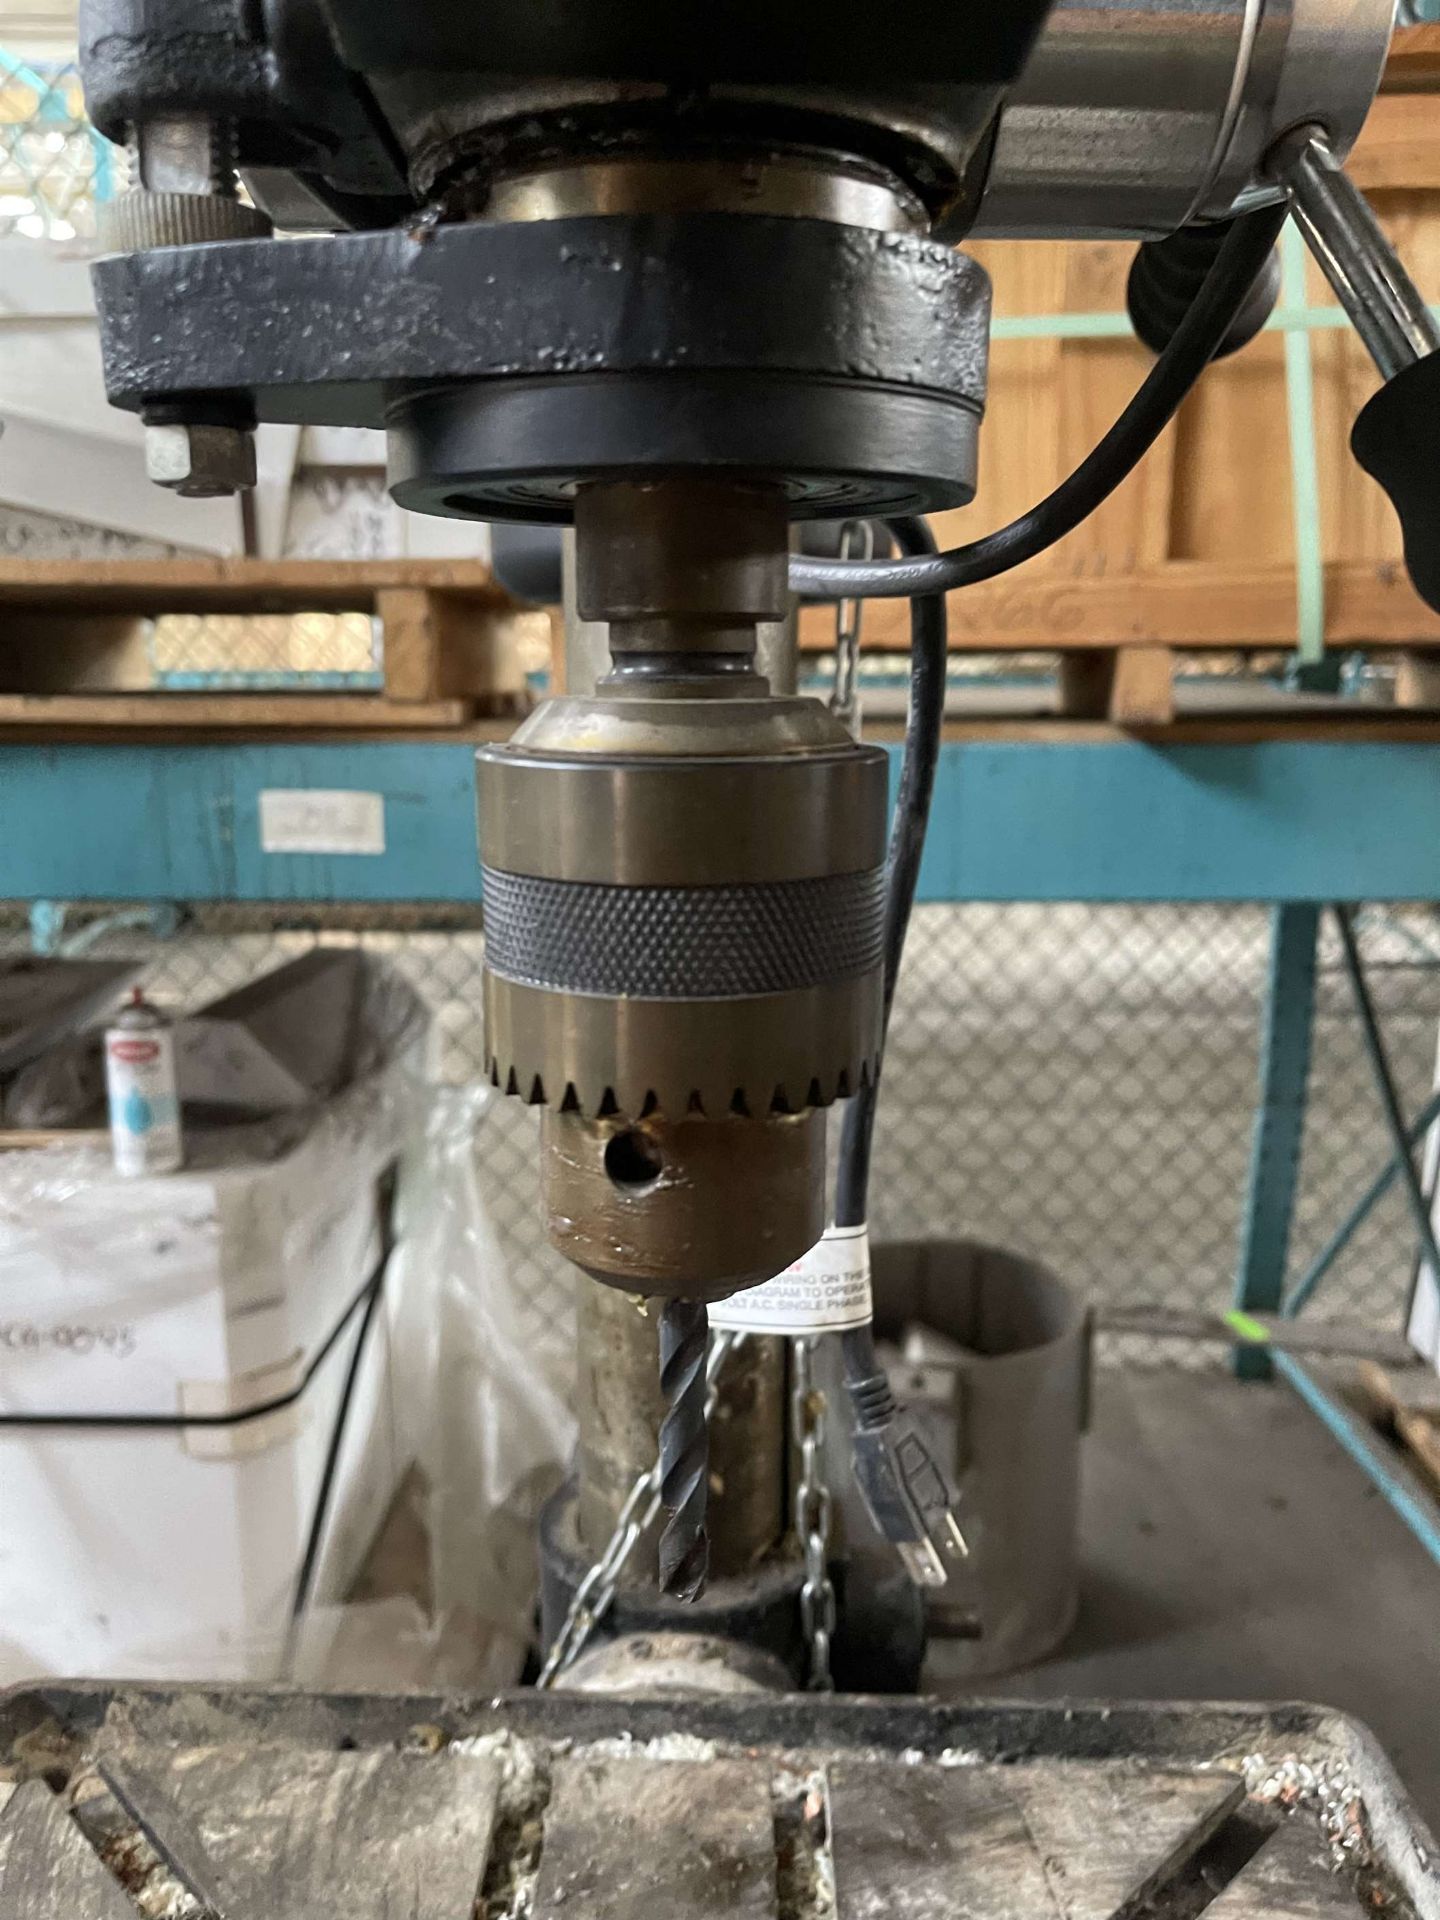 JET JDP-20MF 20" Step Pulley Drill Press, s/n 19046167, 10" Throat, 13-1/4" x 15-3/4" Table - Image 5 of 6